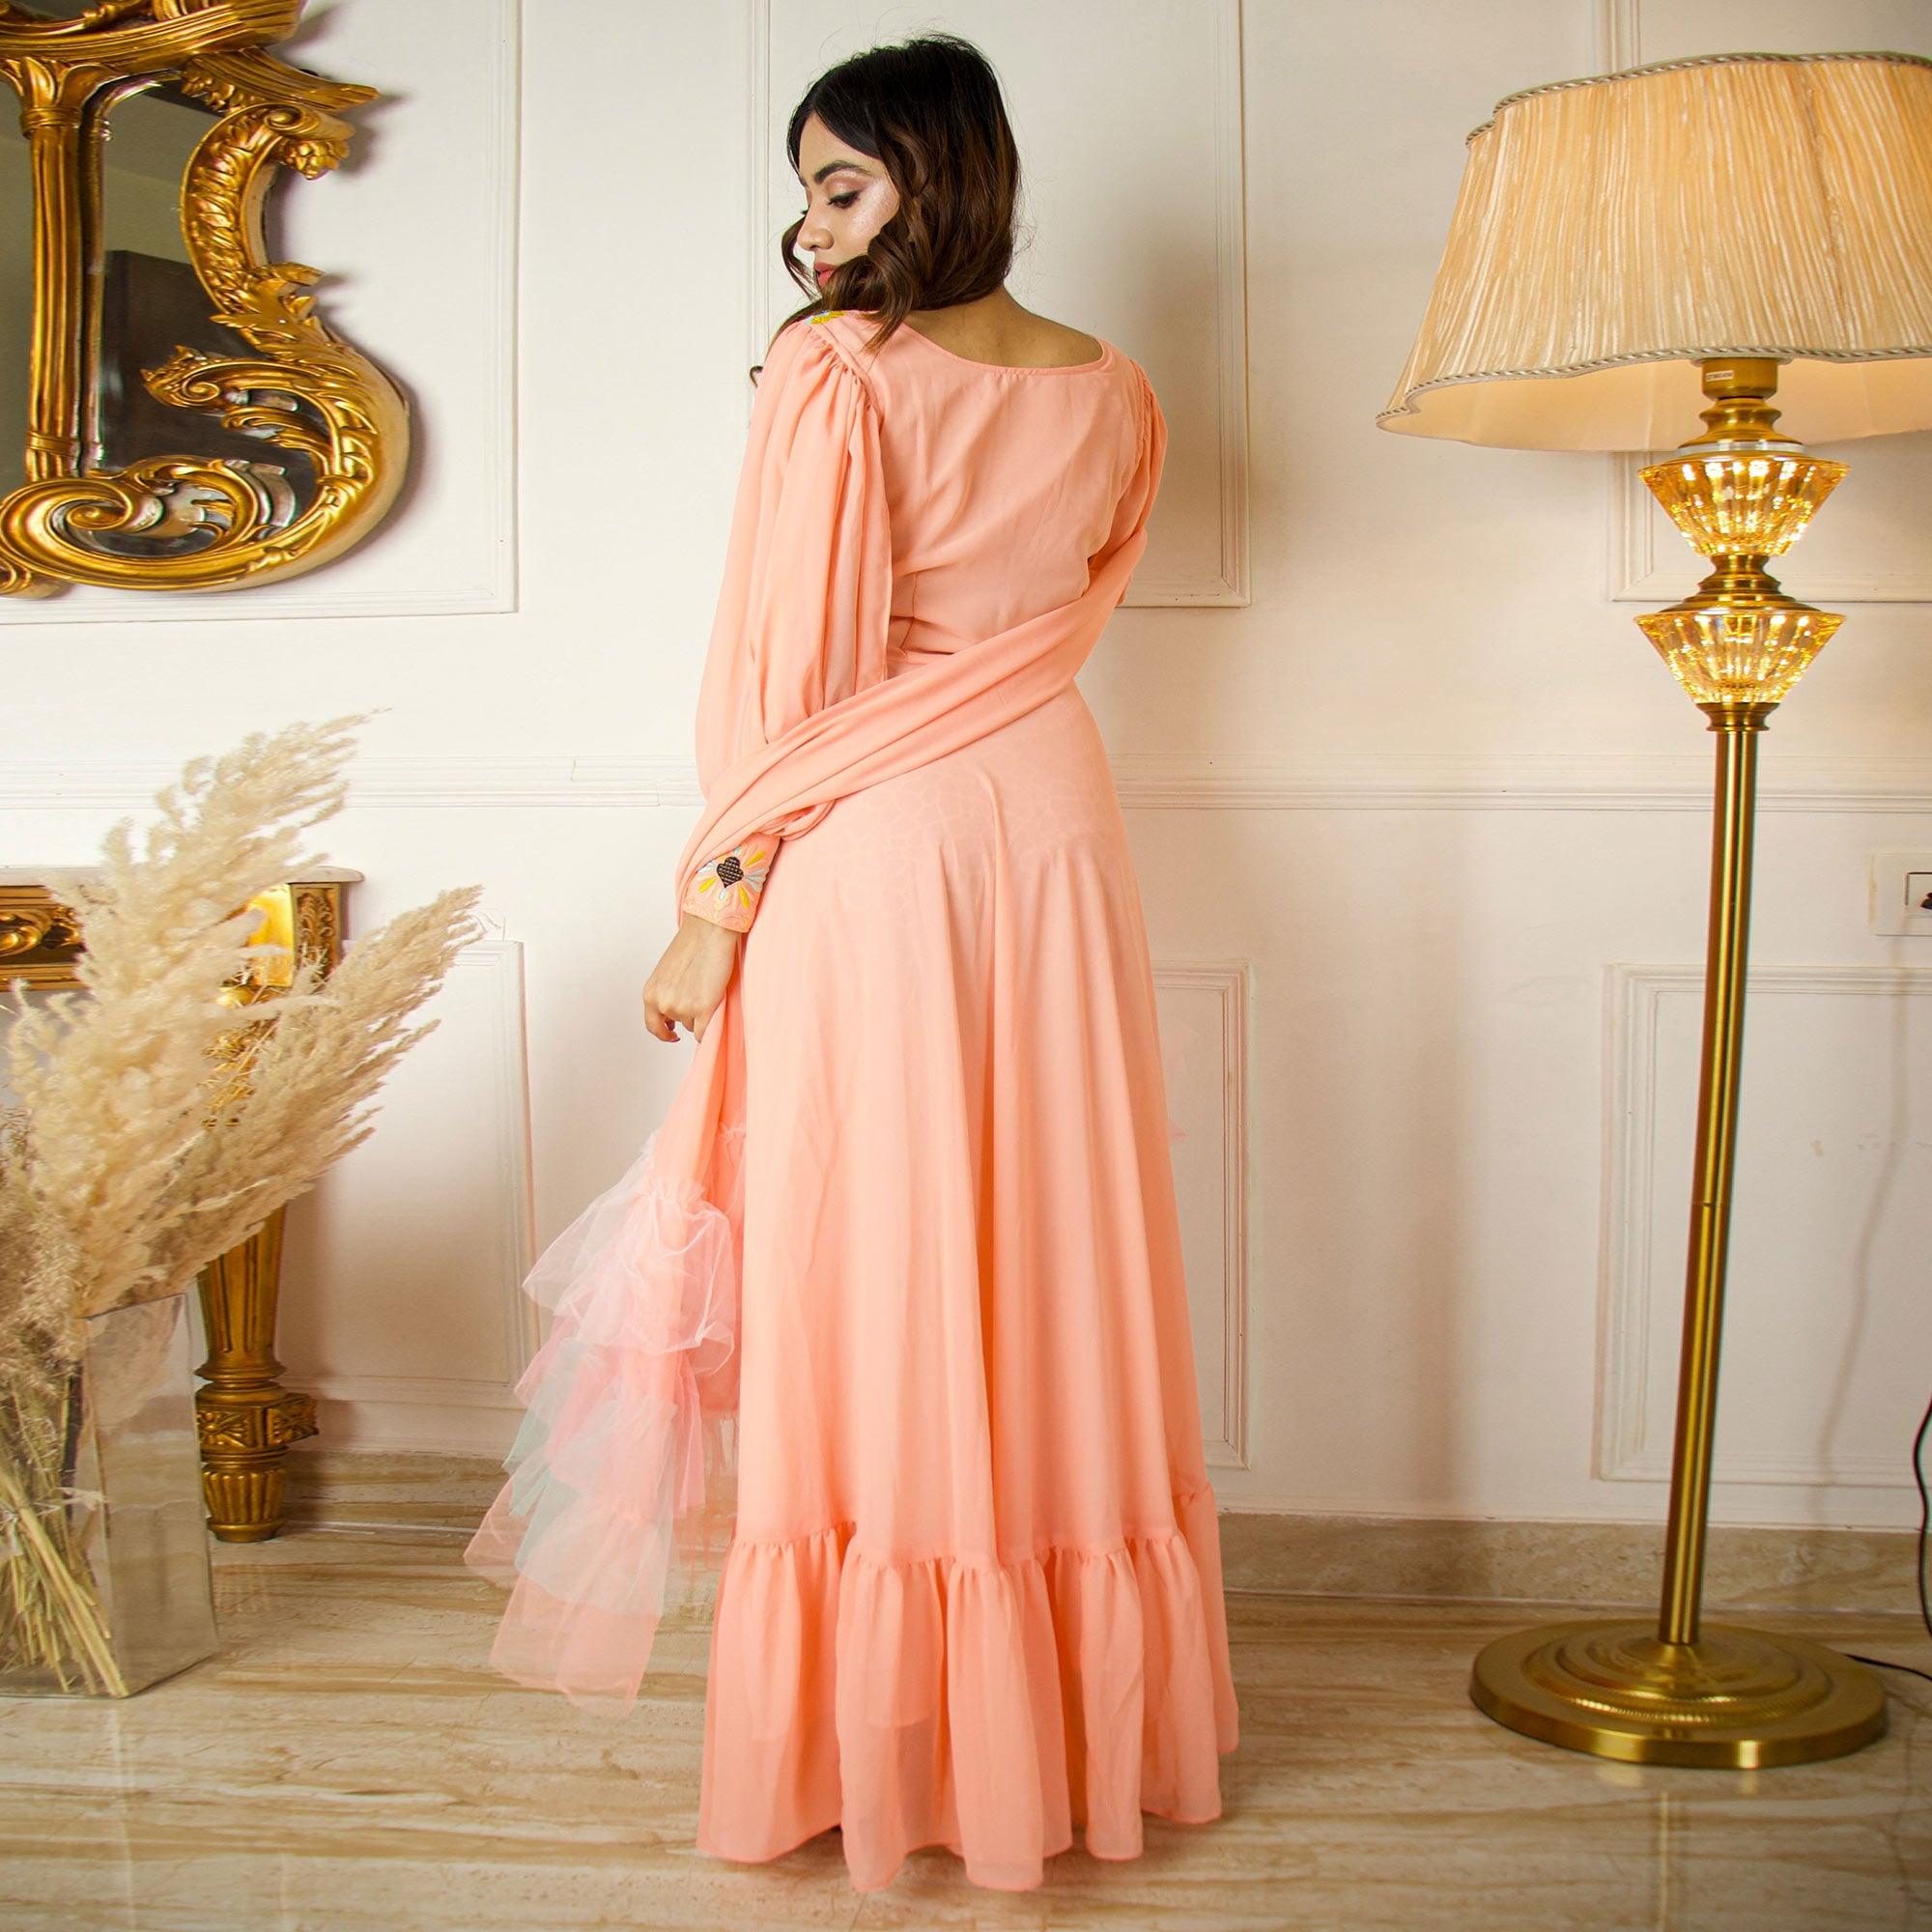 Peach Evening Dress New A Line High Neck Chiffon Long Formal Party Gown  With Sleeves From Linda_wedding, $124.05 | DHgate.Com